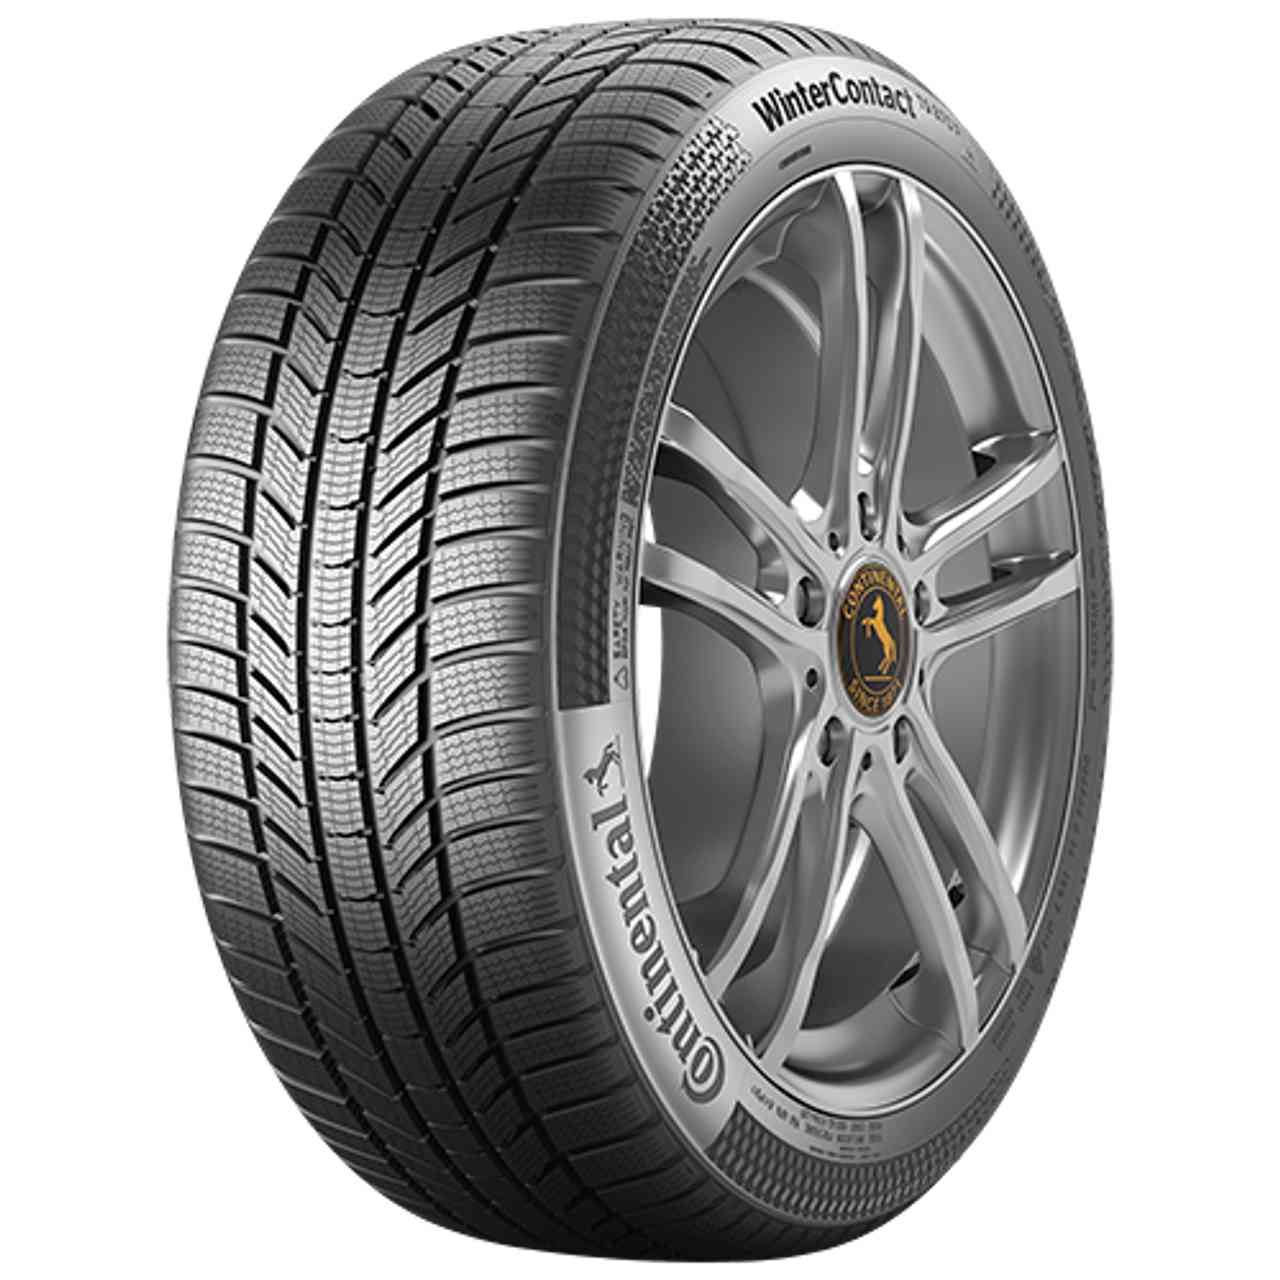 CONTINENTAL WINTERCONTACT TS 870 P (EVc) 225/45R19 96V FR BSW von Continental